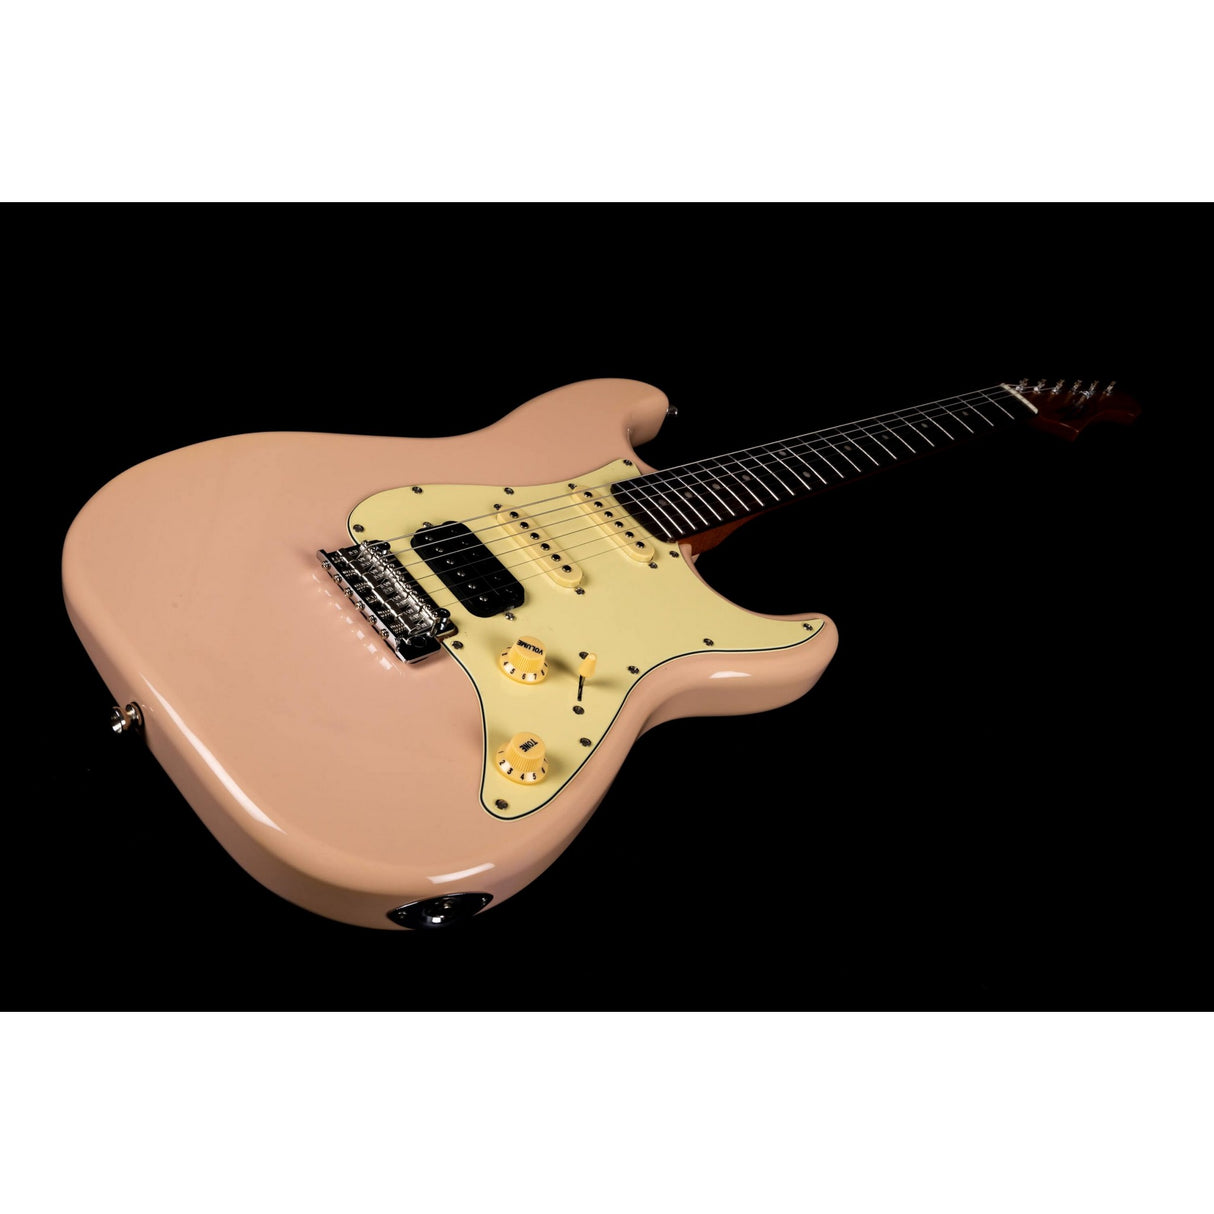 Jet Guitars JS 400 PK R HSS Basswood Body Electric Guitar with Roasted Maple Neck, Rosewood Fretboard